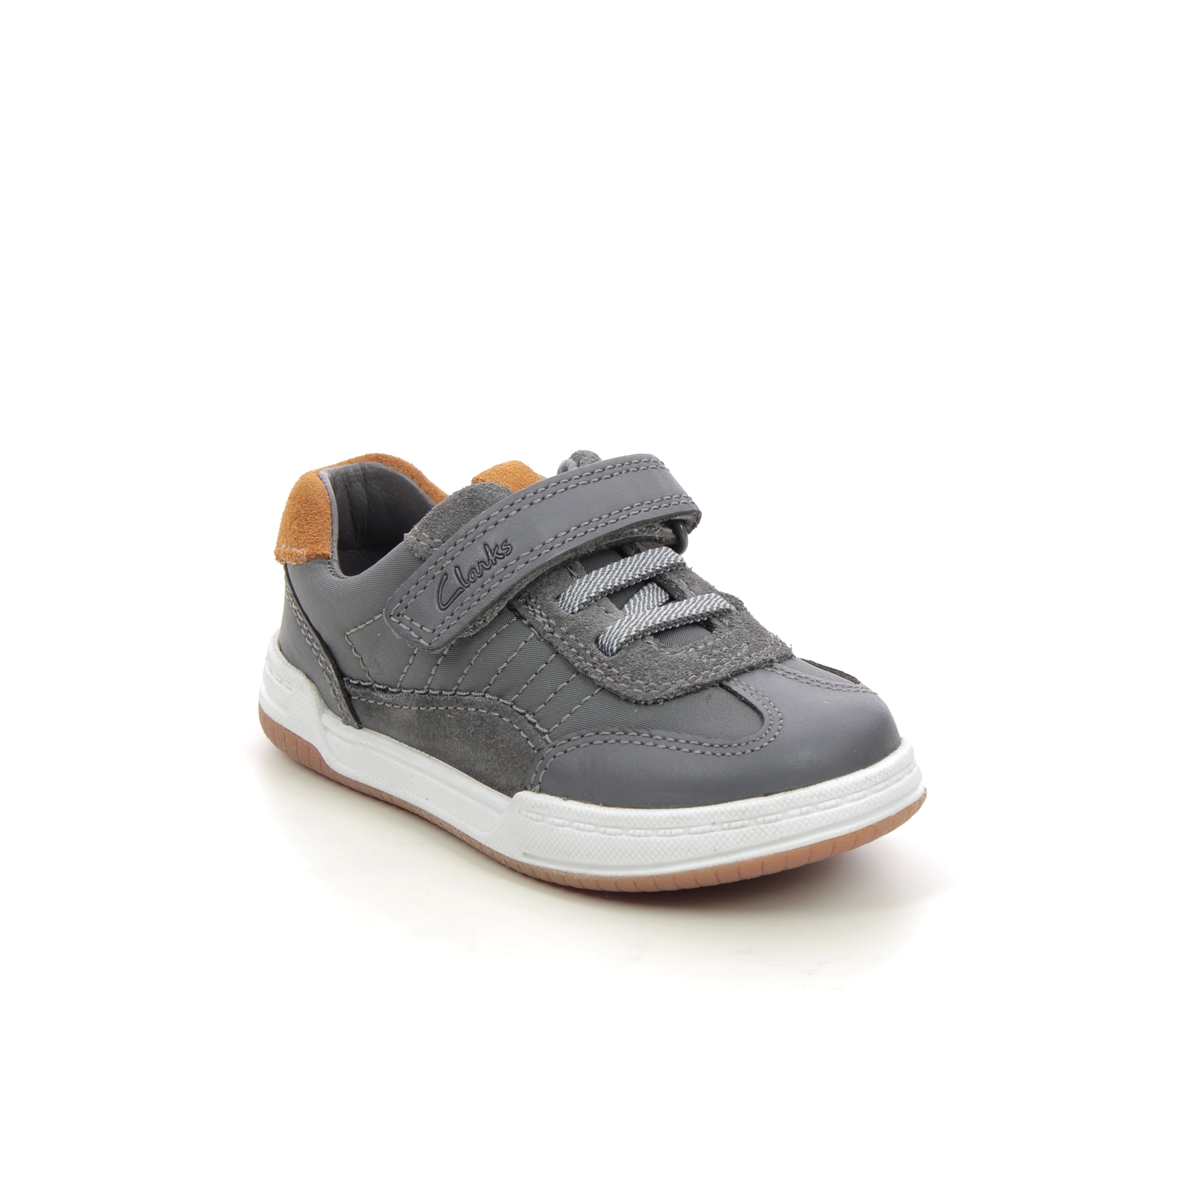 Clarks Fawn Family T Grey Leather Kids Boys Toddler Shoes 751286F In Size 4 In Plain Grey Leather F Width Fitting Regular Fit For kids